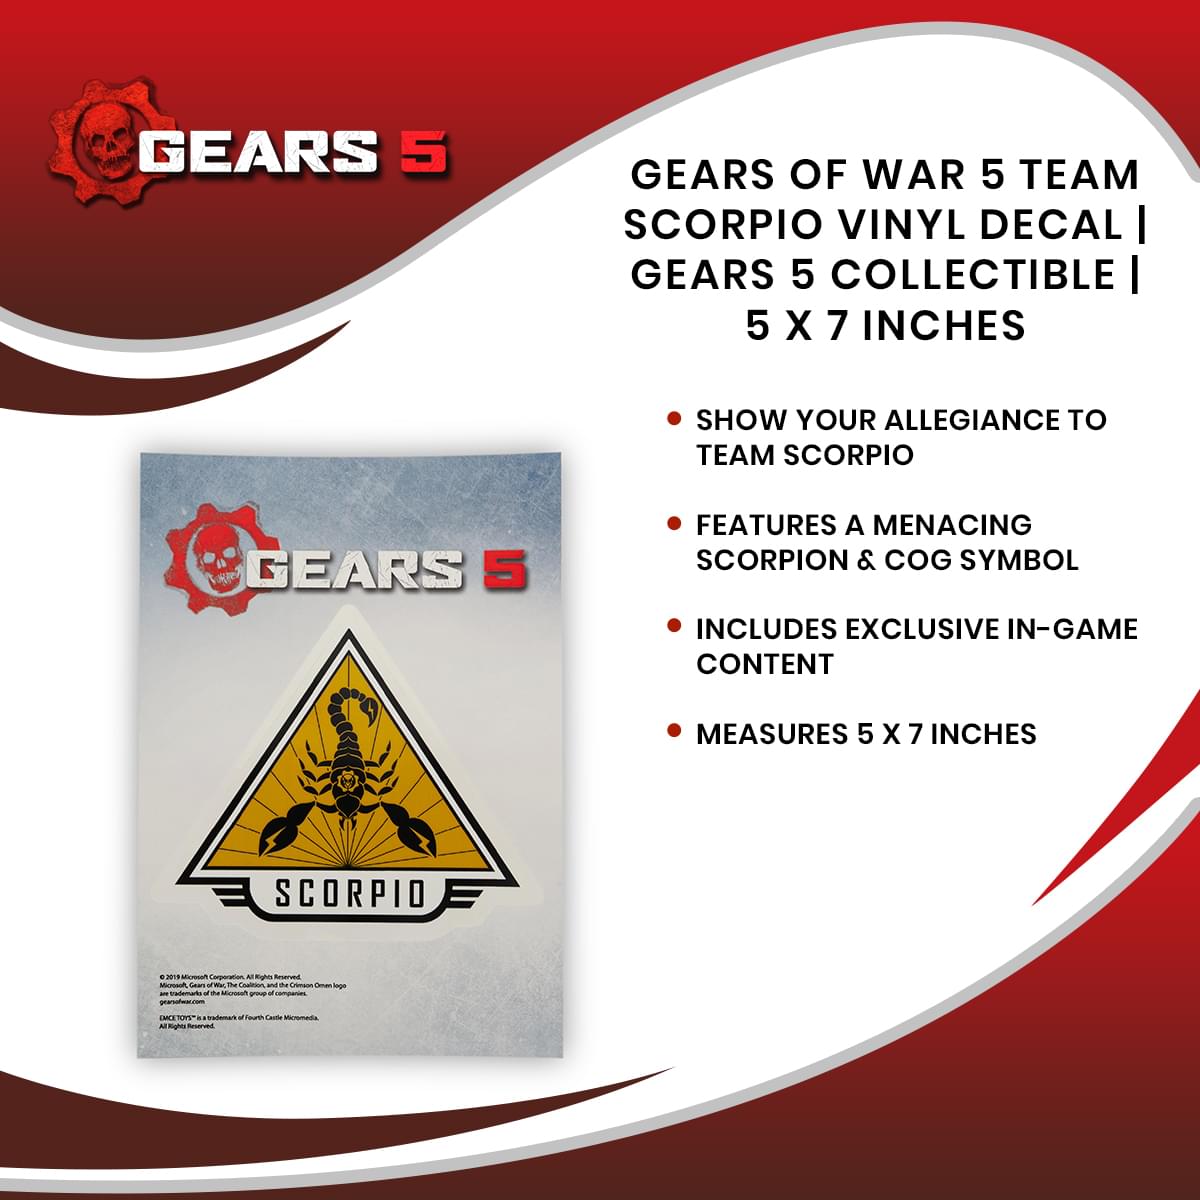 Gears of War 5 Team Scorpio Vinyl Decal | Gears 5 Collectible | 5 x 7 Inches